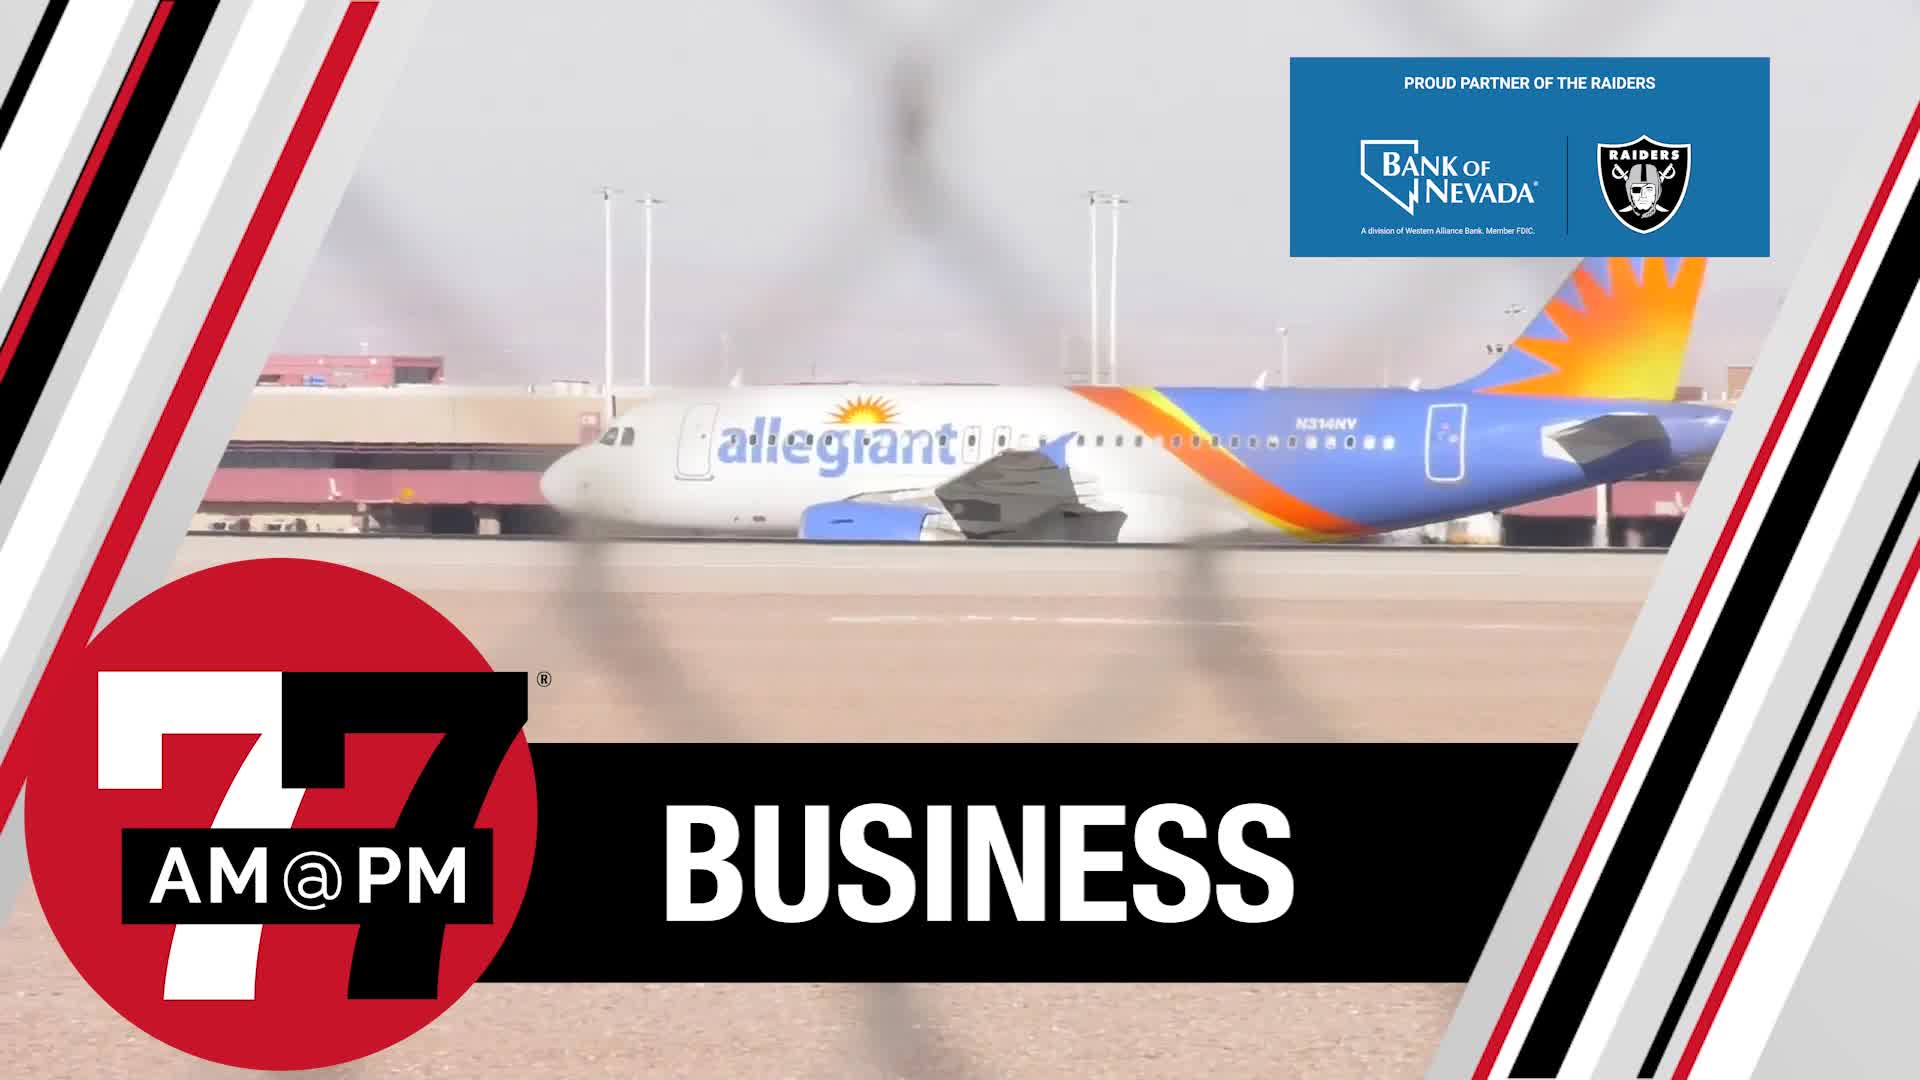 Changes coming to Allegiant’s credit card